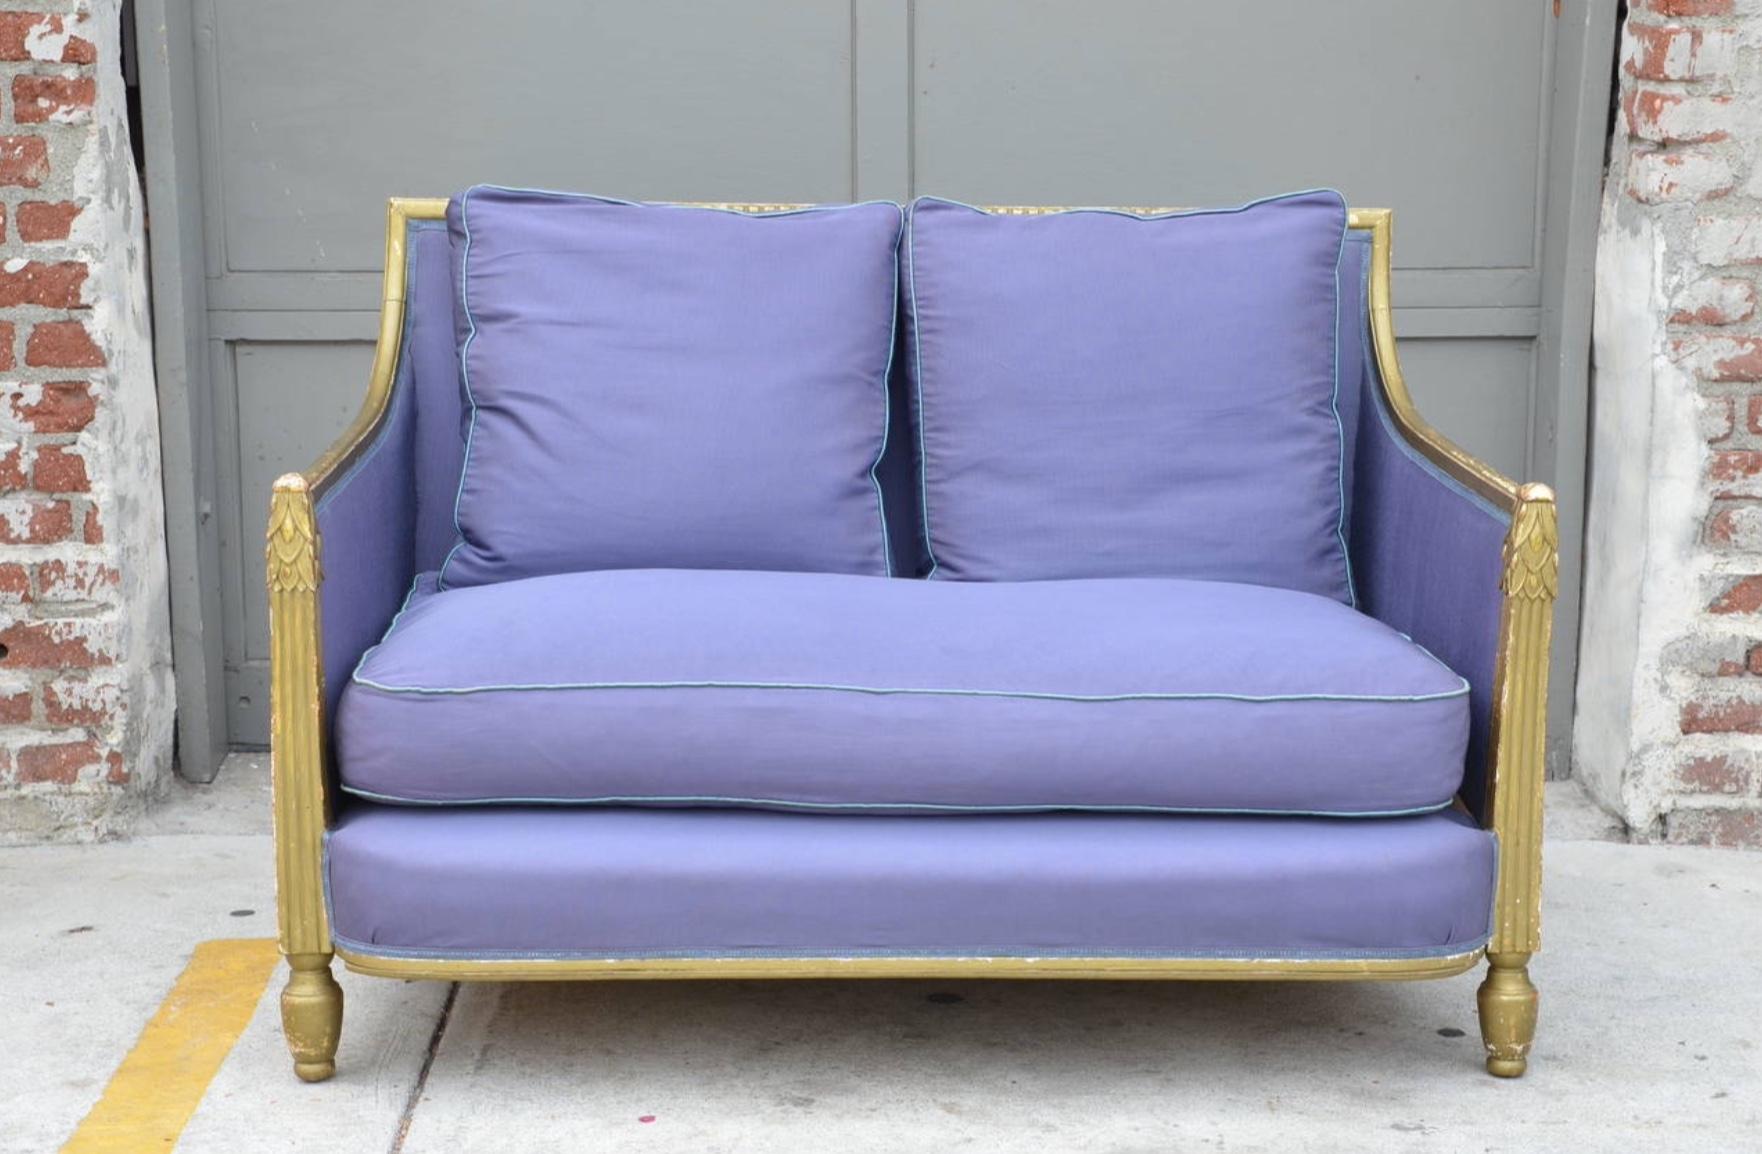 Exceptional Gilt Art Deco Settee by Paul Follot (Paris 1877 -
Sainte-Maxime 1941). Unusual ornamentation. Original condition. Could be reupholstered with C. O. M.

The French crafts designer and decorator Paul Follot is an Art déco